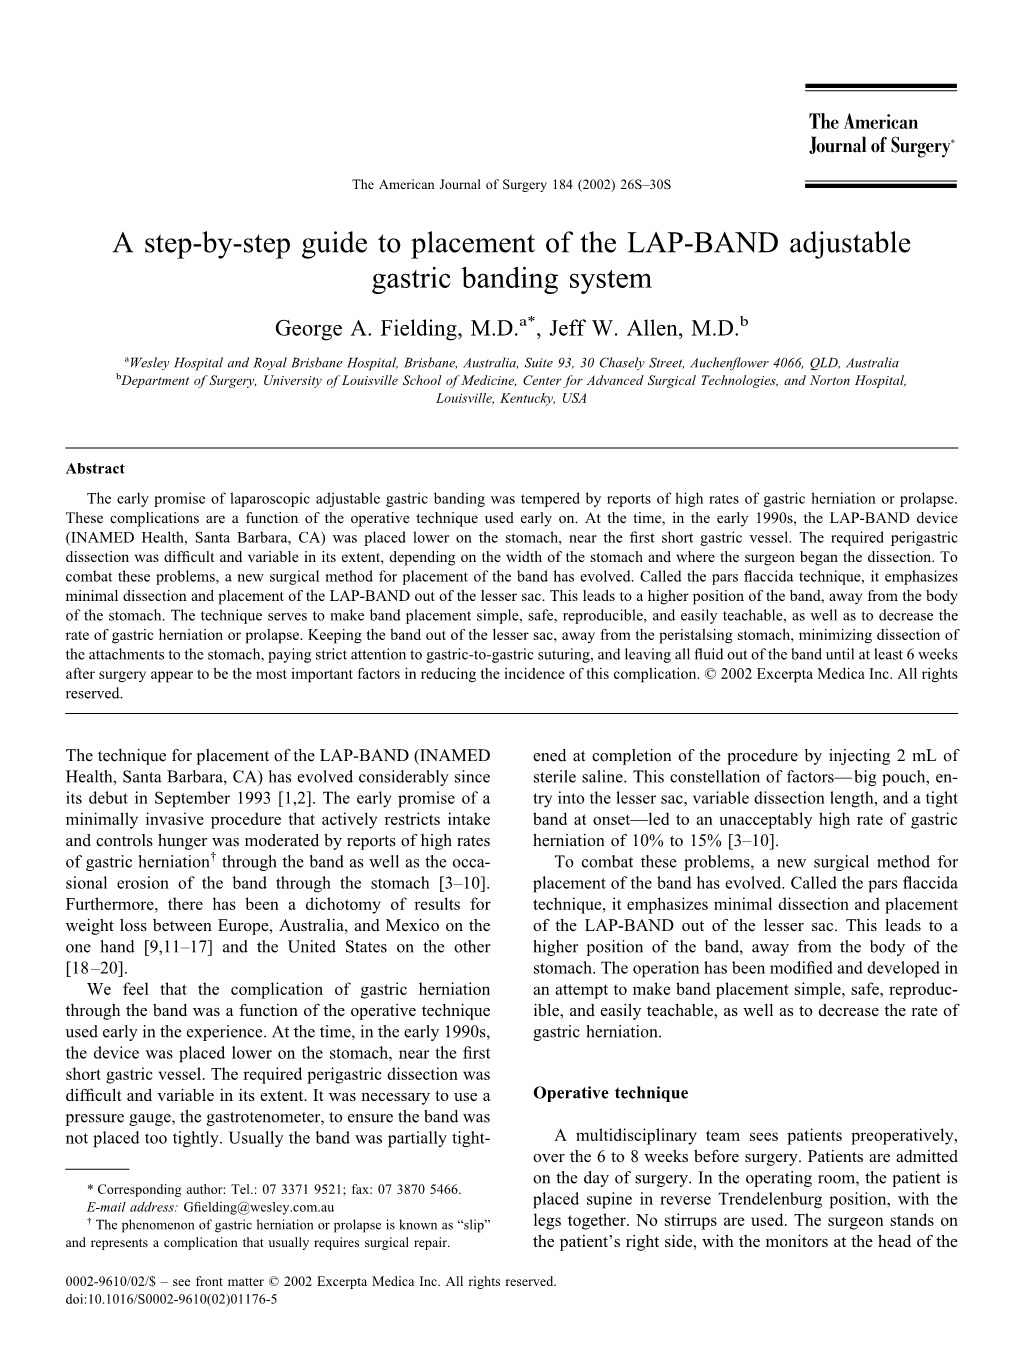 A Step-By-Step Guide to Placement of the LAP-BAND Adjustable Gastric Banding System